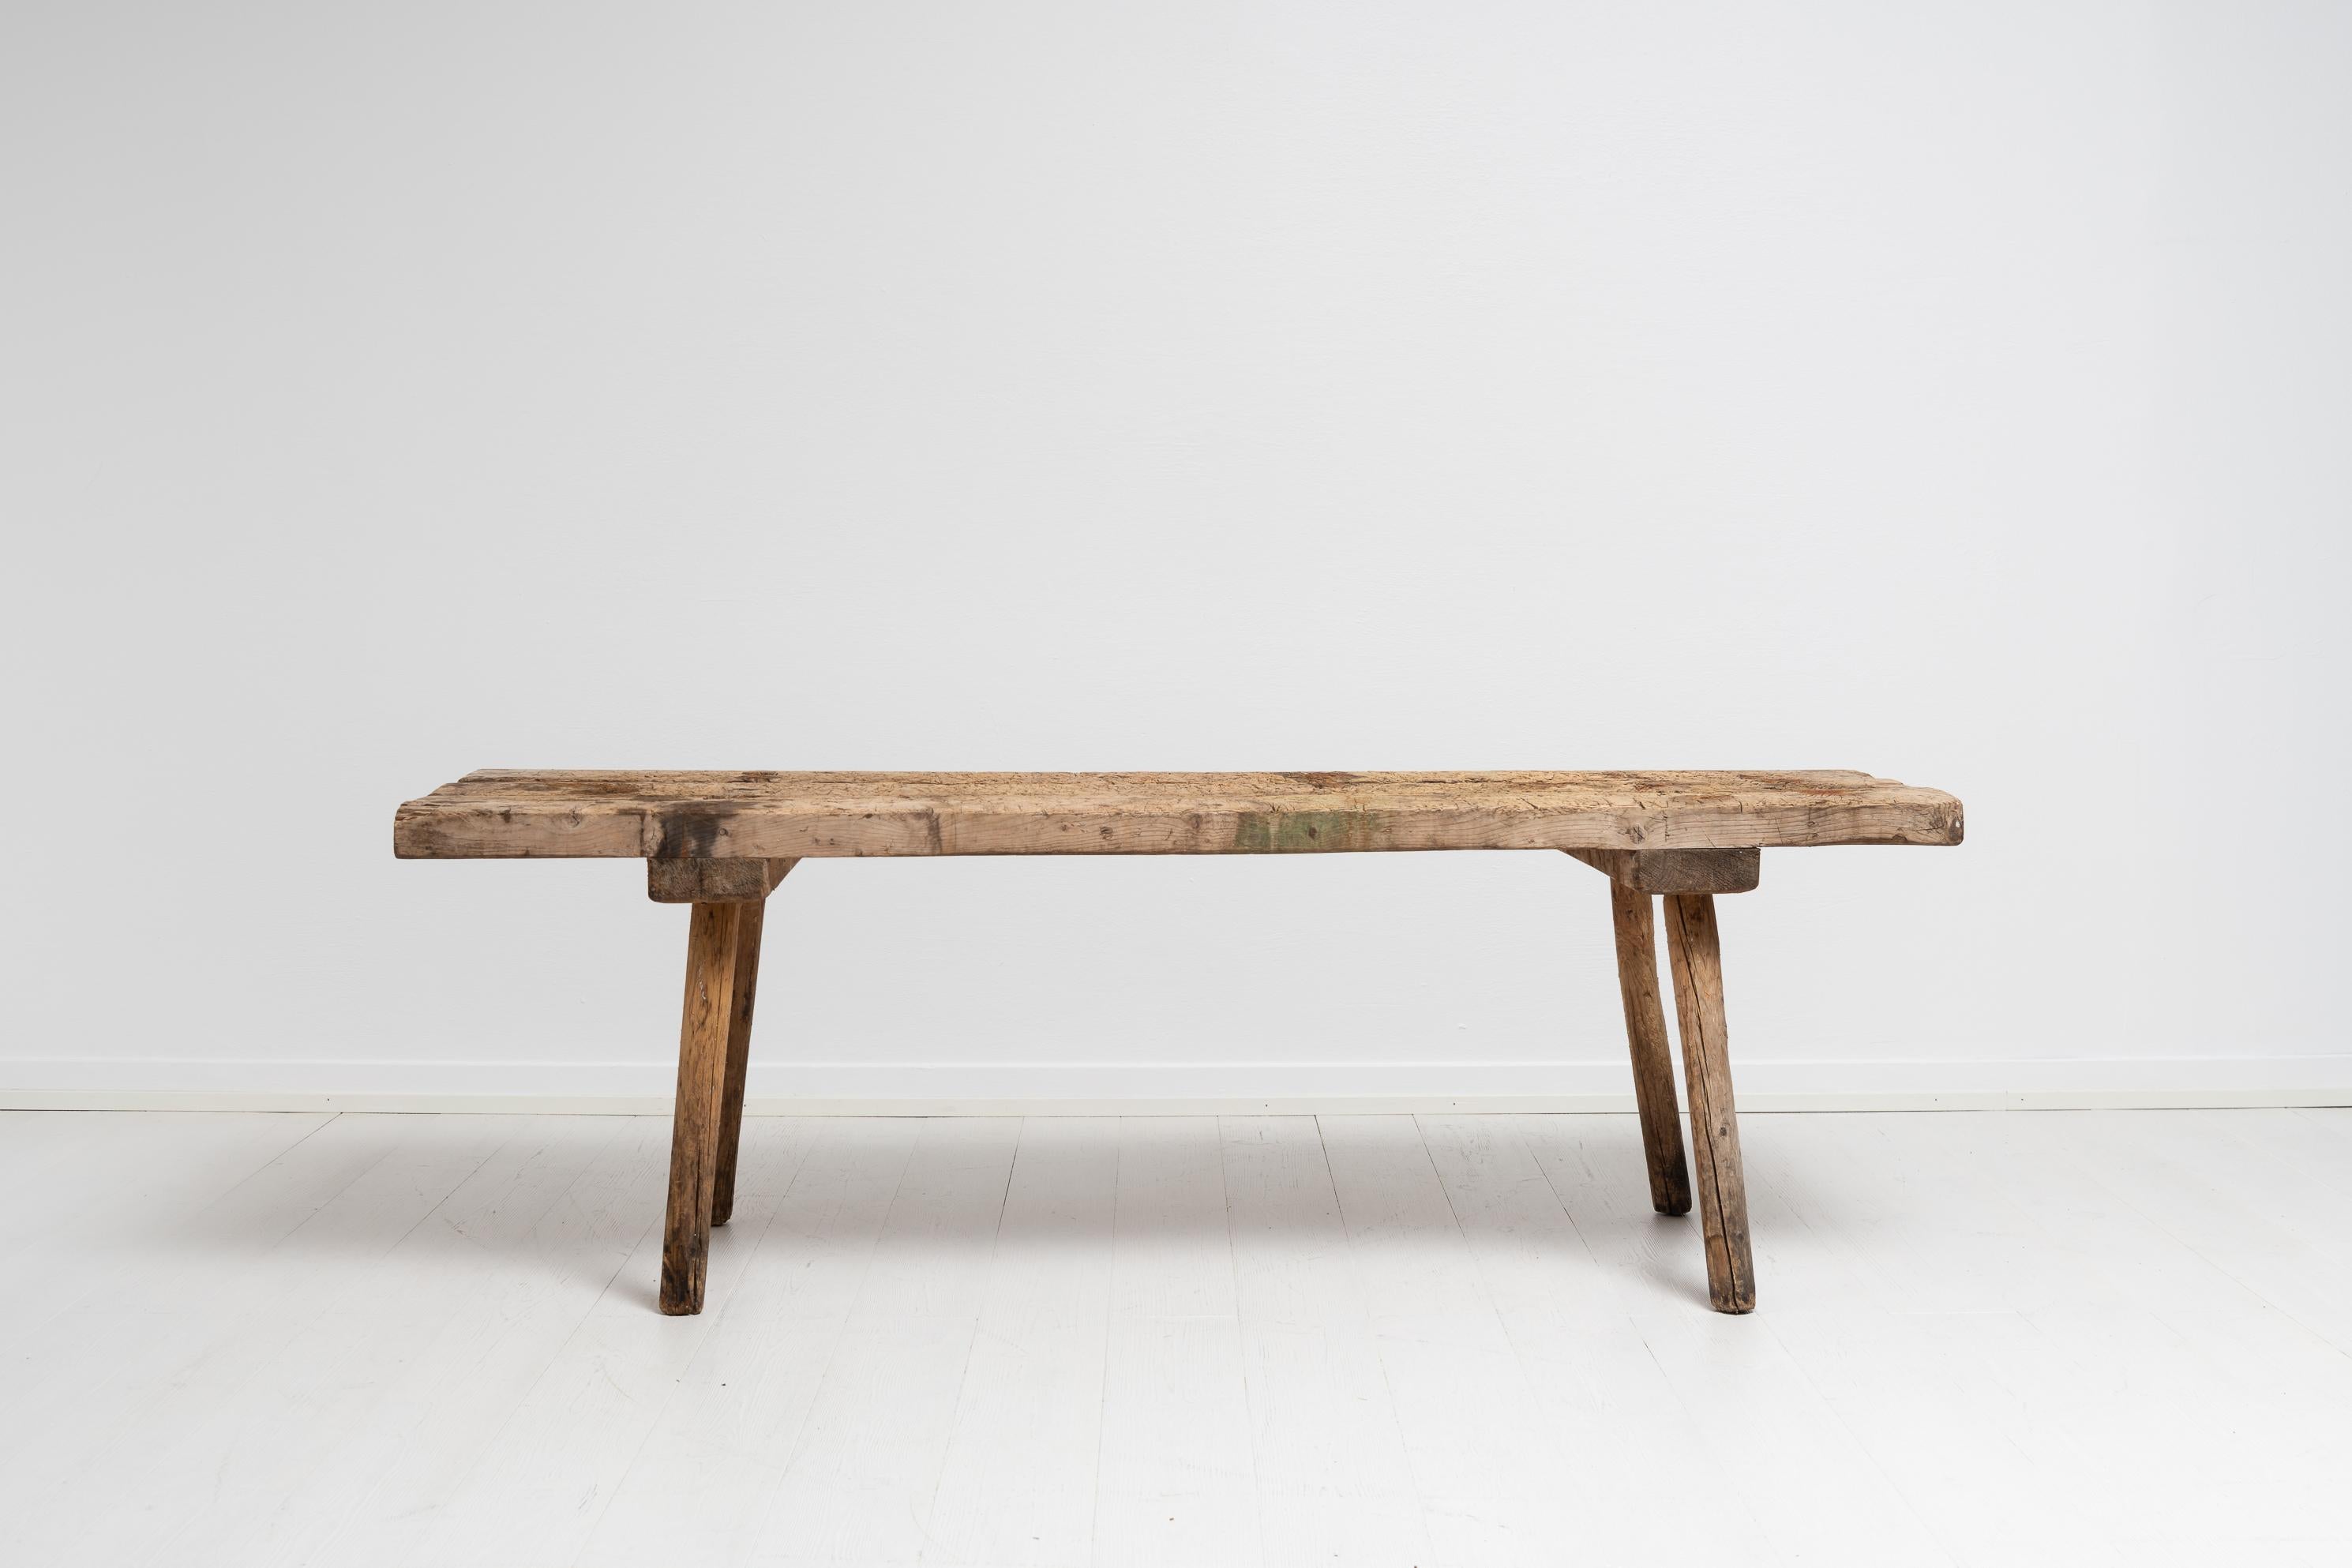 Hand-Crafted Early 19th Century Swedish Folk Art Rustic Work Bench Coffee Table For Sale